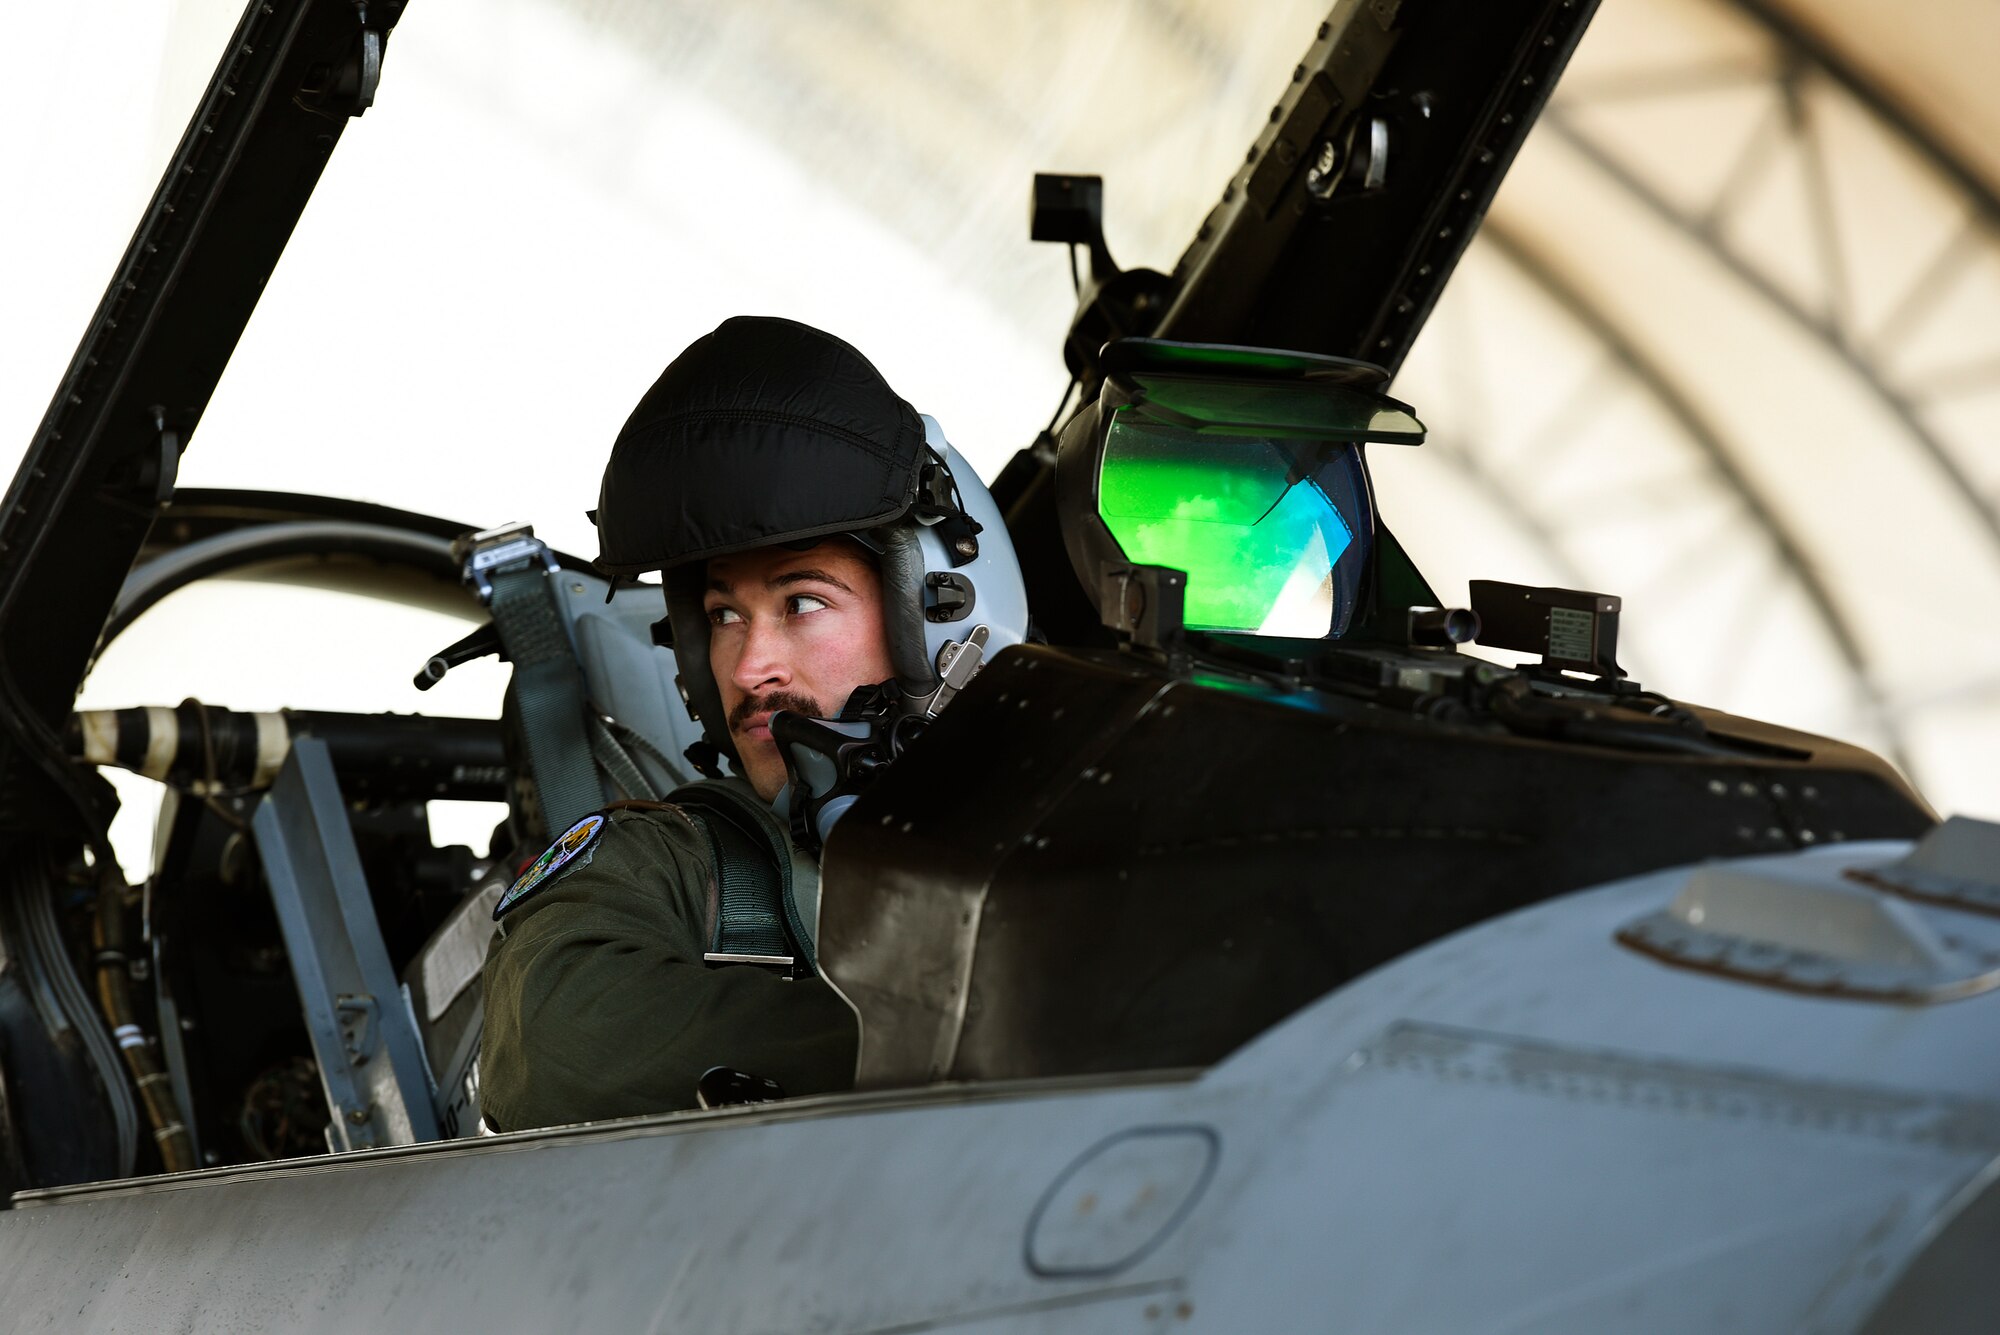 U.S. Air Force Capt. Drew Hauber, an F-16 Fighting Falcon pilot assigned to the 112th Expeditionary Fighter Squadron, conducts preflight checks Feb. 22, 2016, during exercise COPE NORTH 16 at Andersen Air Force Base, Guam. Training exercises such as CN16, allow the U.S., Japan and Australia air forces to develop combat capabilities, enhancing air superiority, electronic warfare, air interdiction, tactical airlift and aerial refueling. (U.S. Air National Guard photo by Staff Sgt. Shane Hughes/Released)